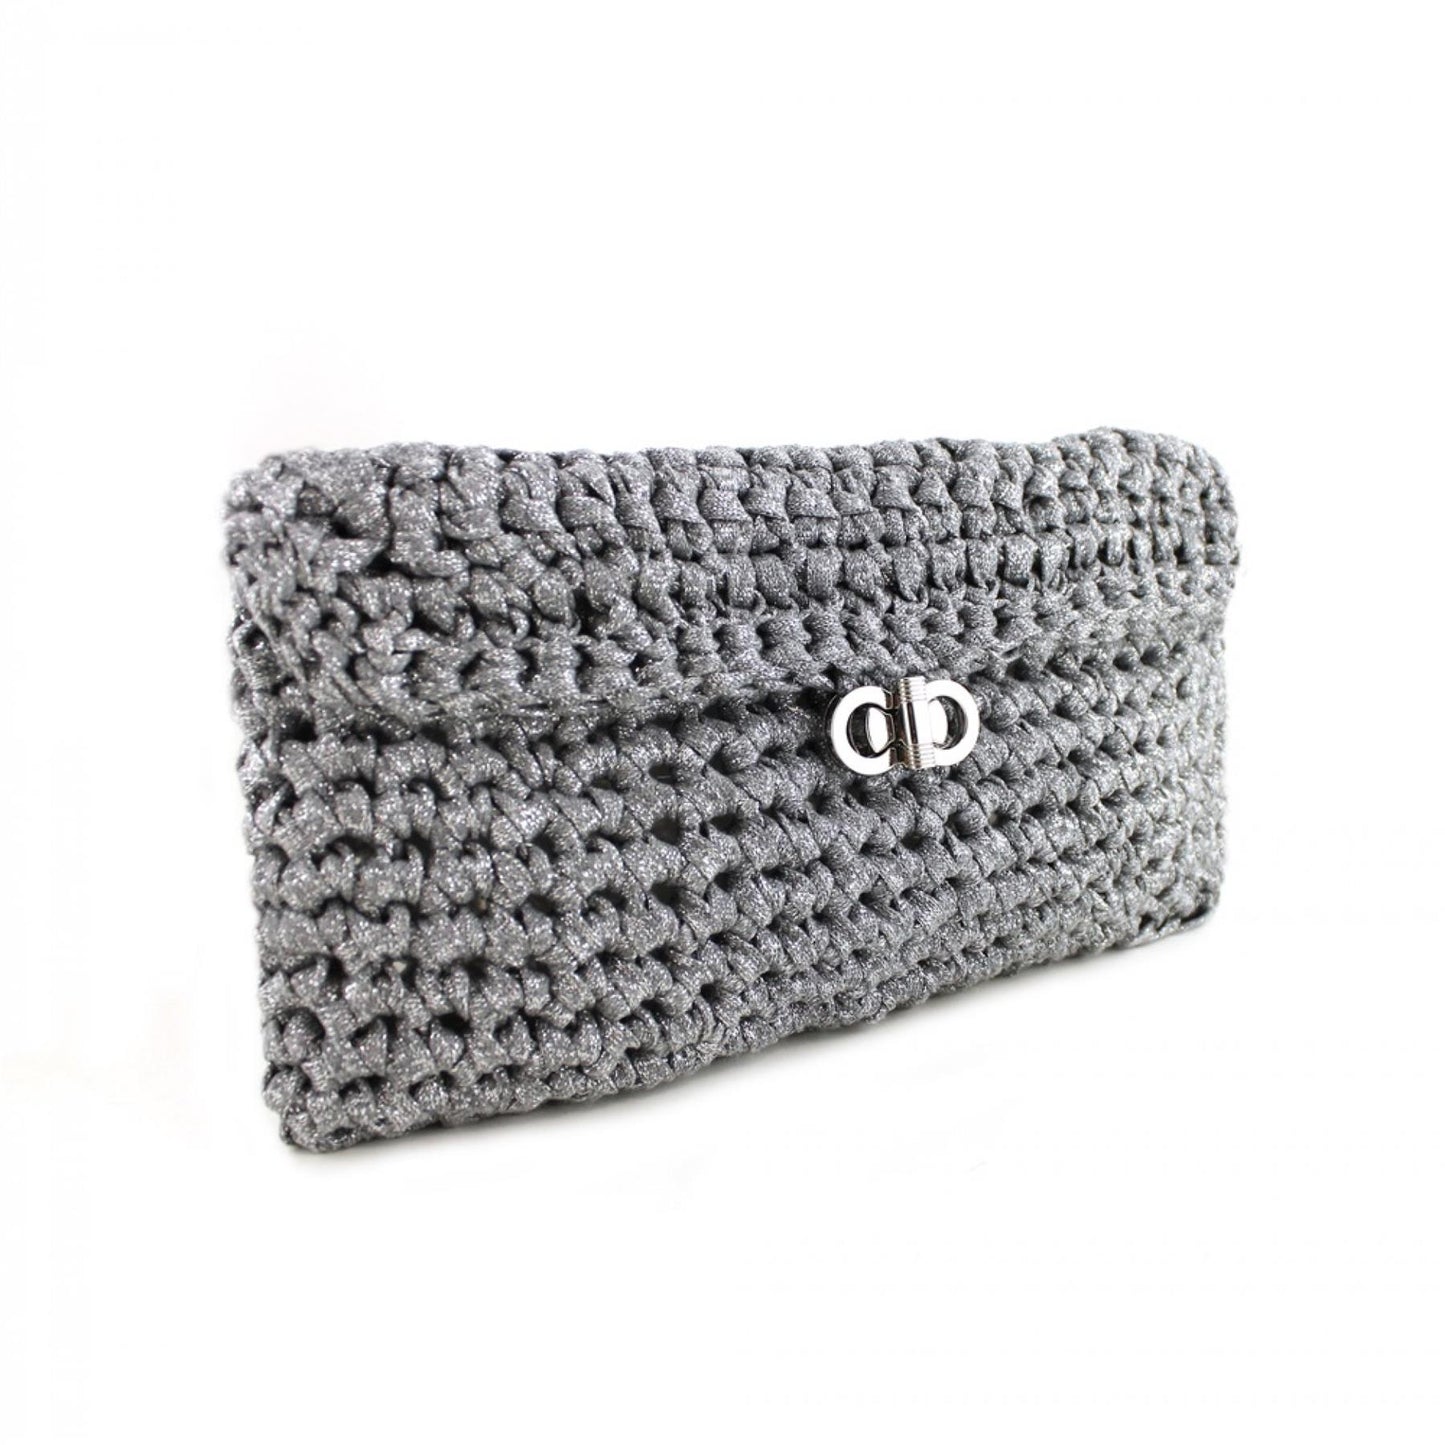 Hoooked RibbonXL Silver Glitter Cotton Charly Clutch Crochet Kit